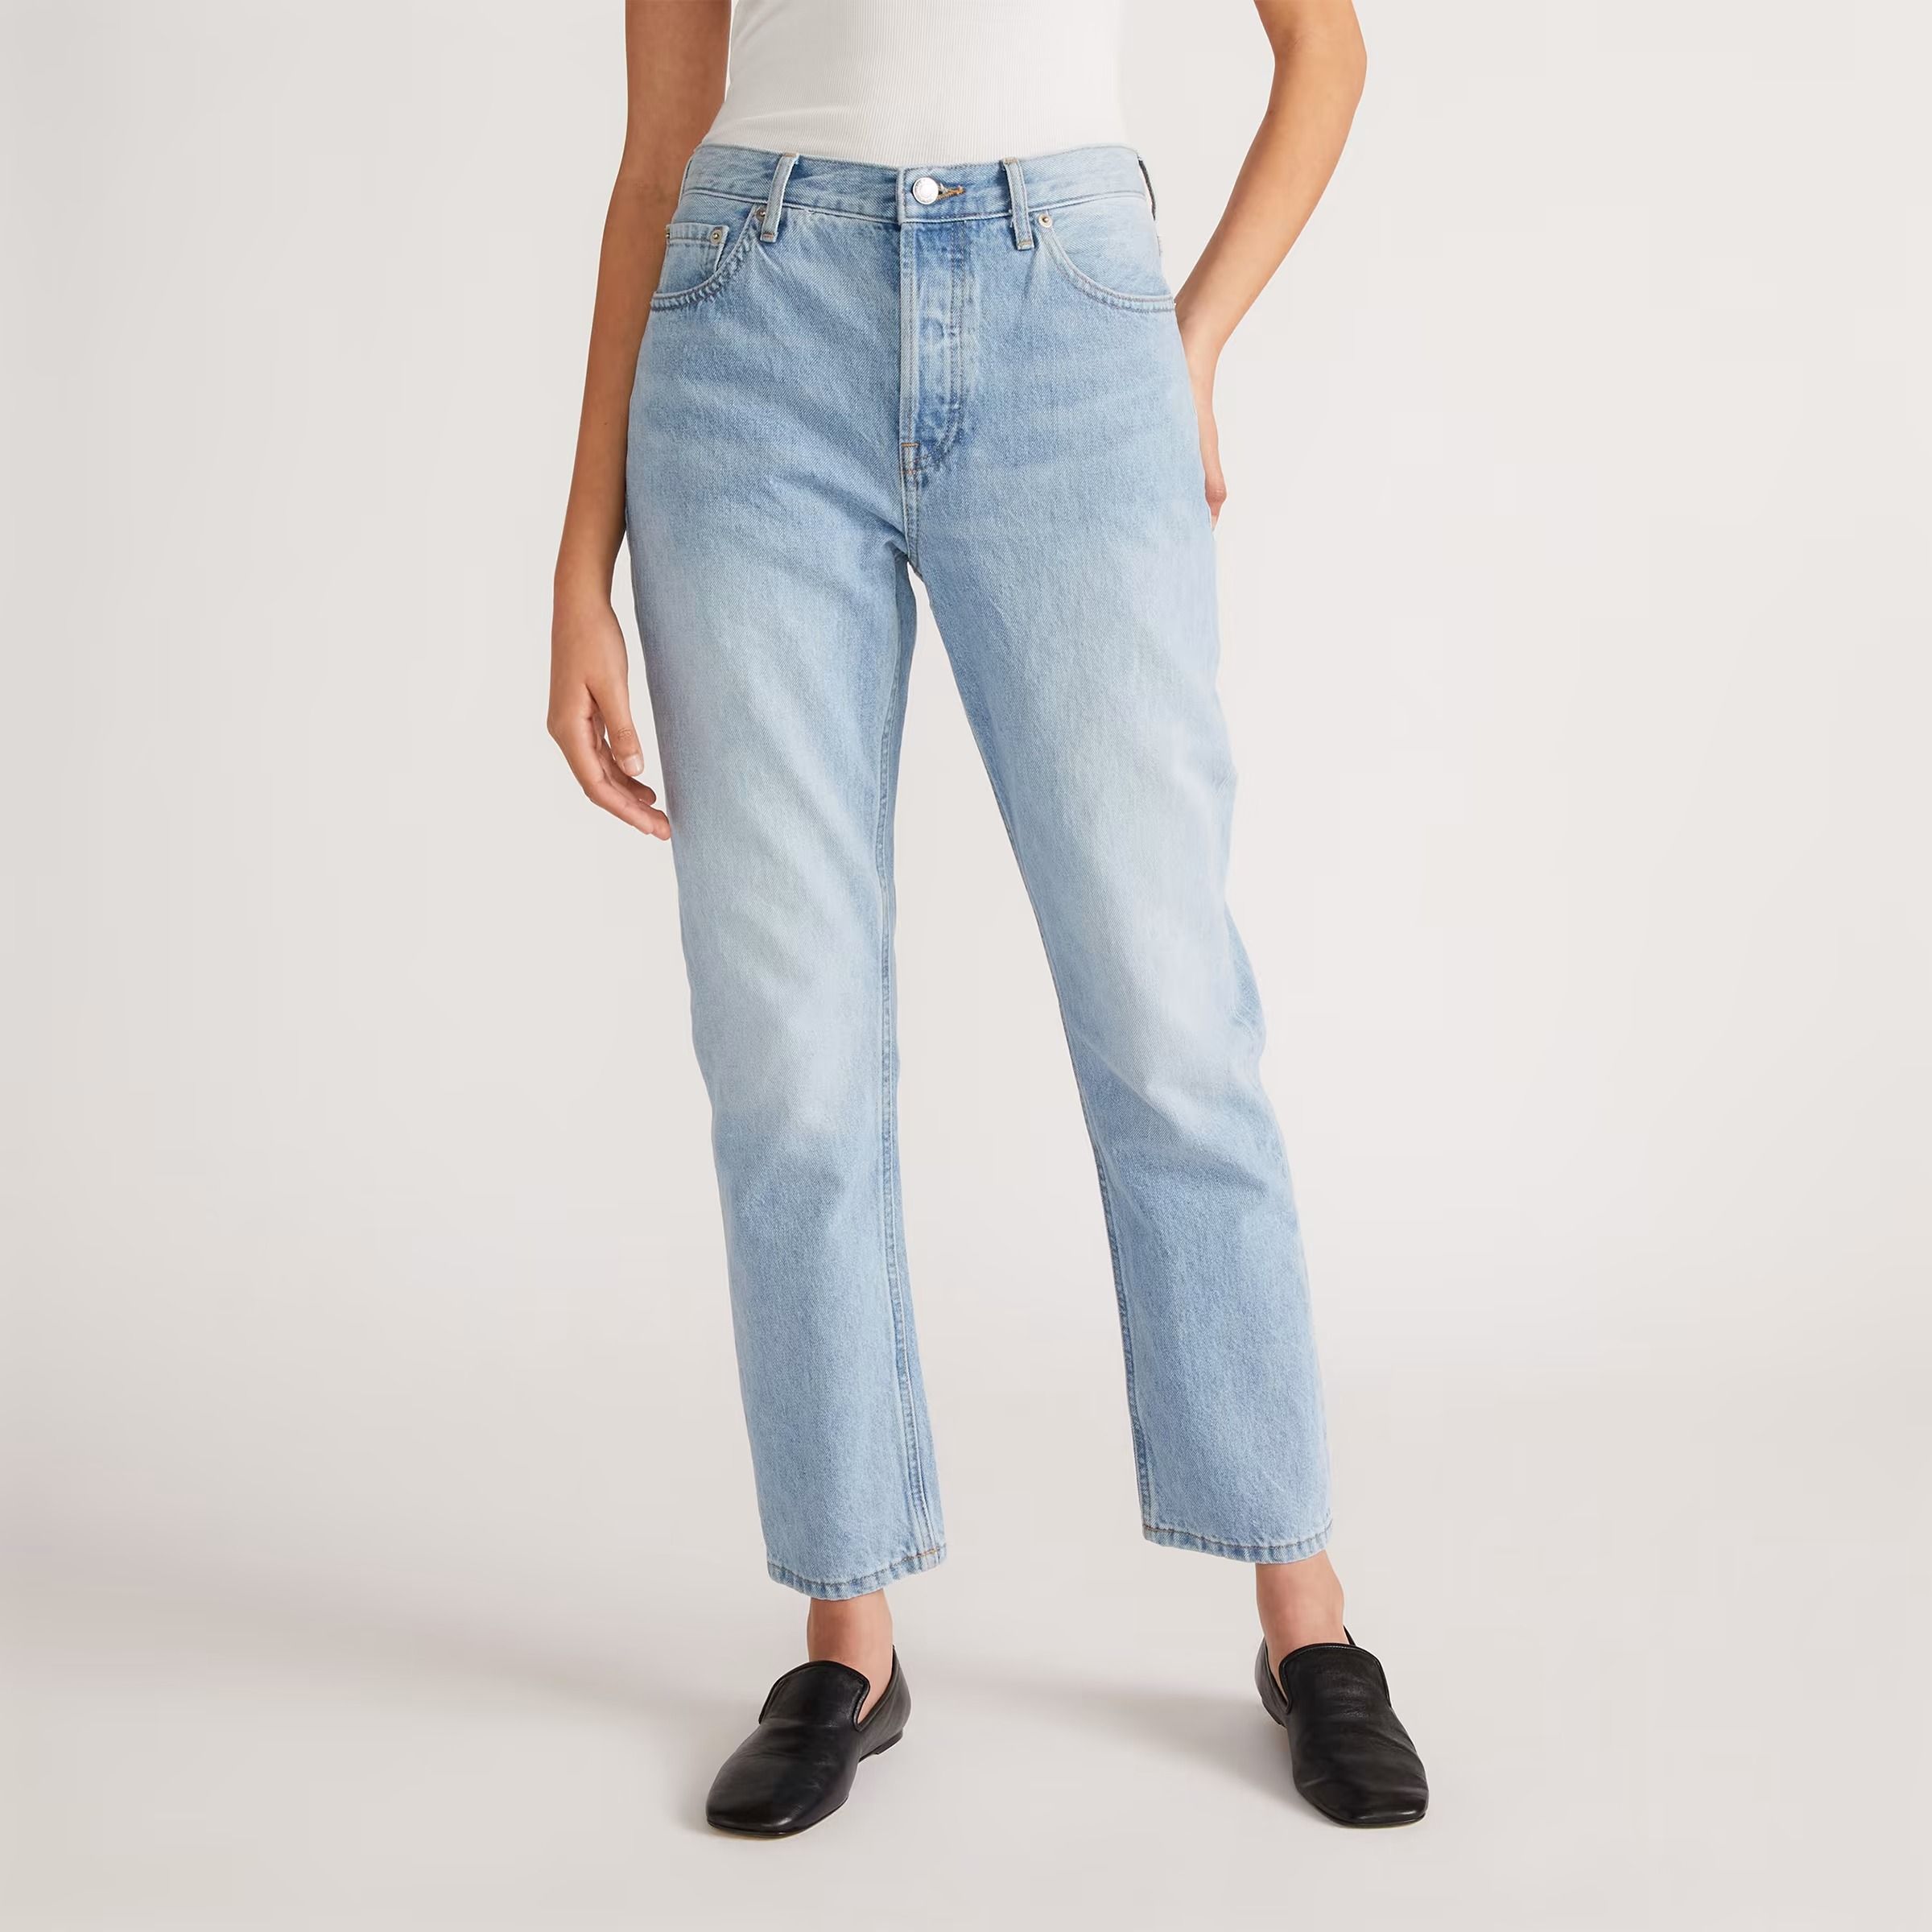 Everlane ’90s Cheeky Jeans Sale 2022 | The Strategist